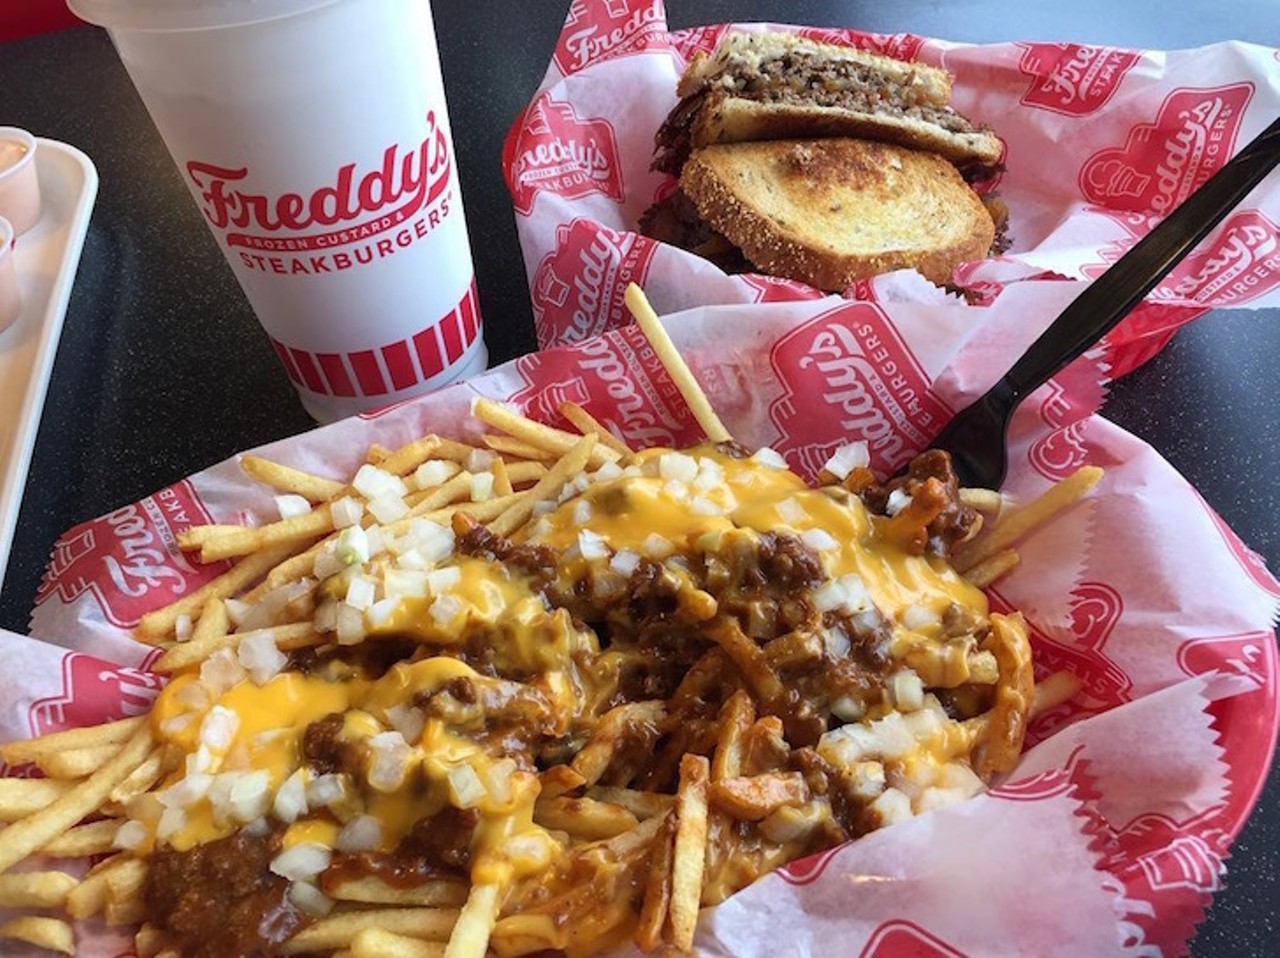 Freddy's Frozen Custard and Steakburgers
3200 S. Orange Ave.; also 8107 Vineland Ave.
Dip Freddy's shoestring fries into some frozen custard, or indulge in their chili cheese fries.  
Photo via Ketzi'ah Azriel/Instagram